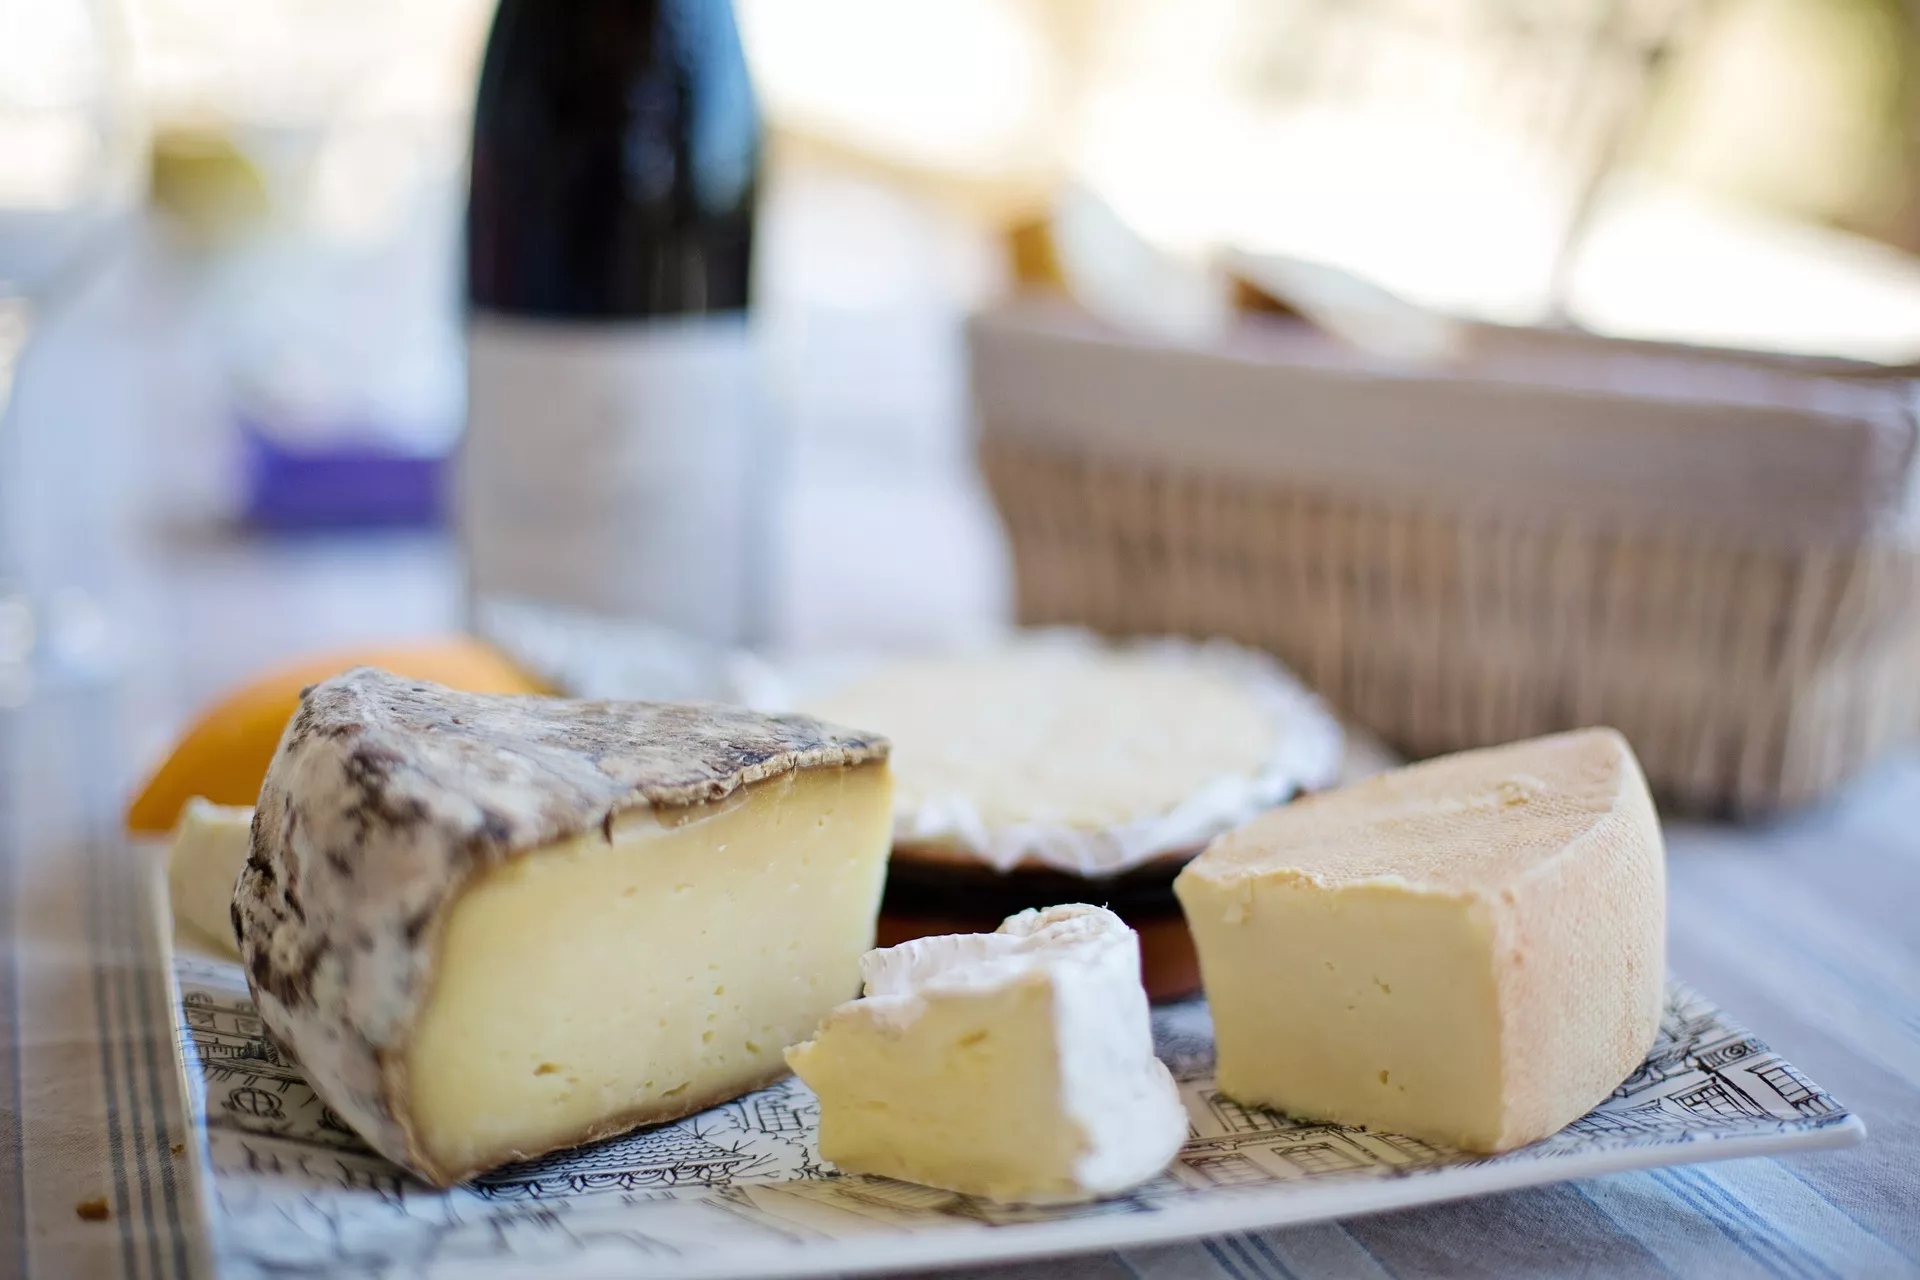 Fromagerie Deruelle in France, Europe | Cheesemakers - Rated 4.1